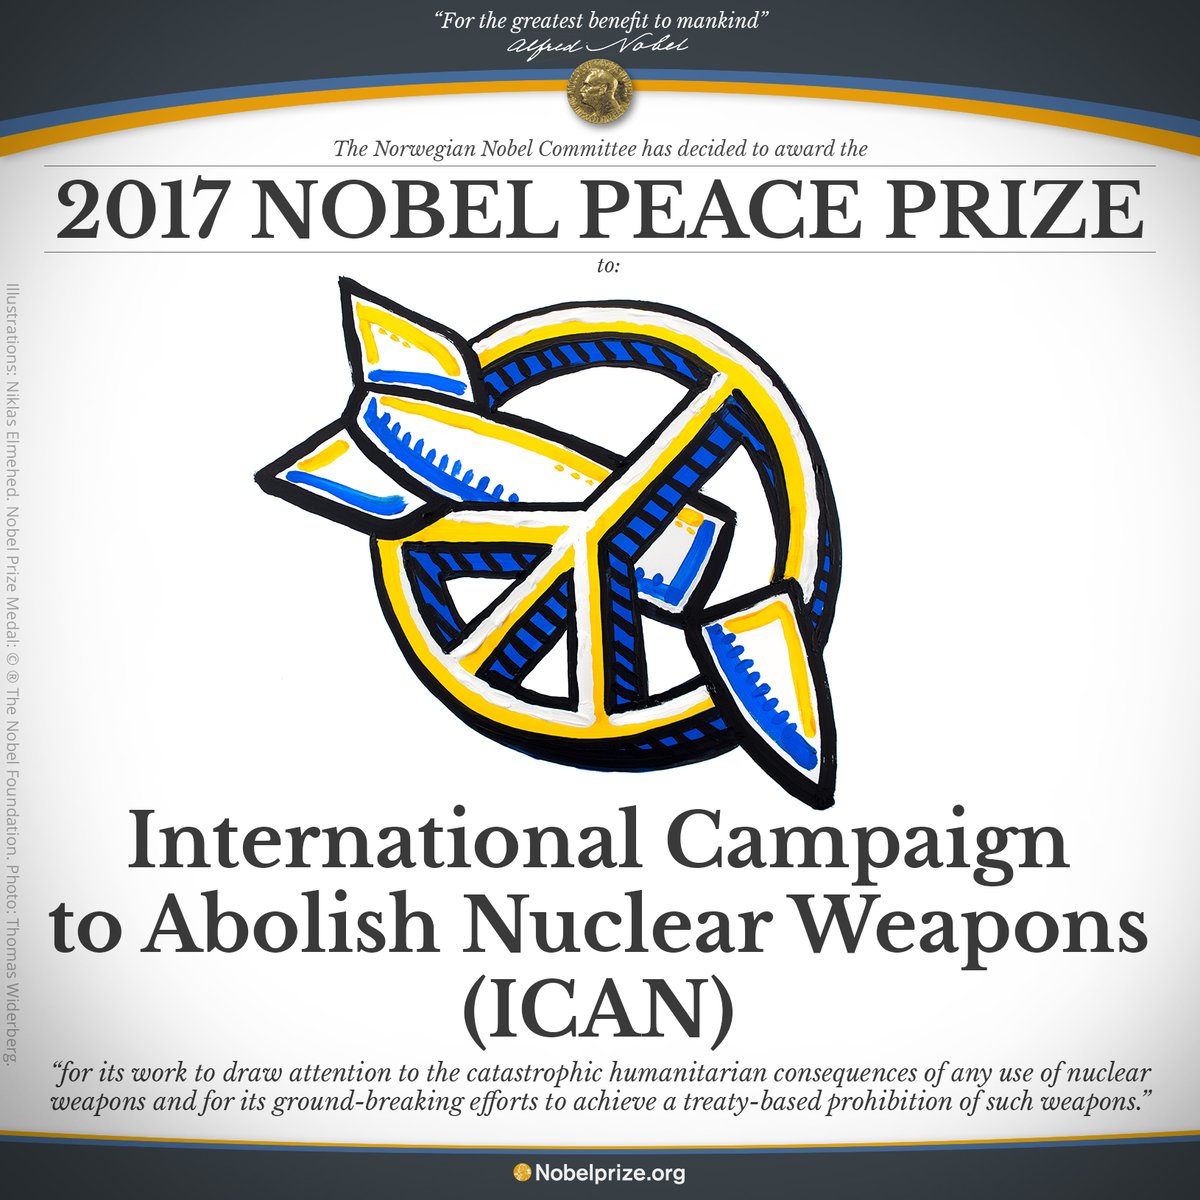 International Campaign to Abolish Nuclear Weapons ICAN, 2017 Nobel Peace Prize